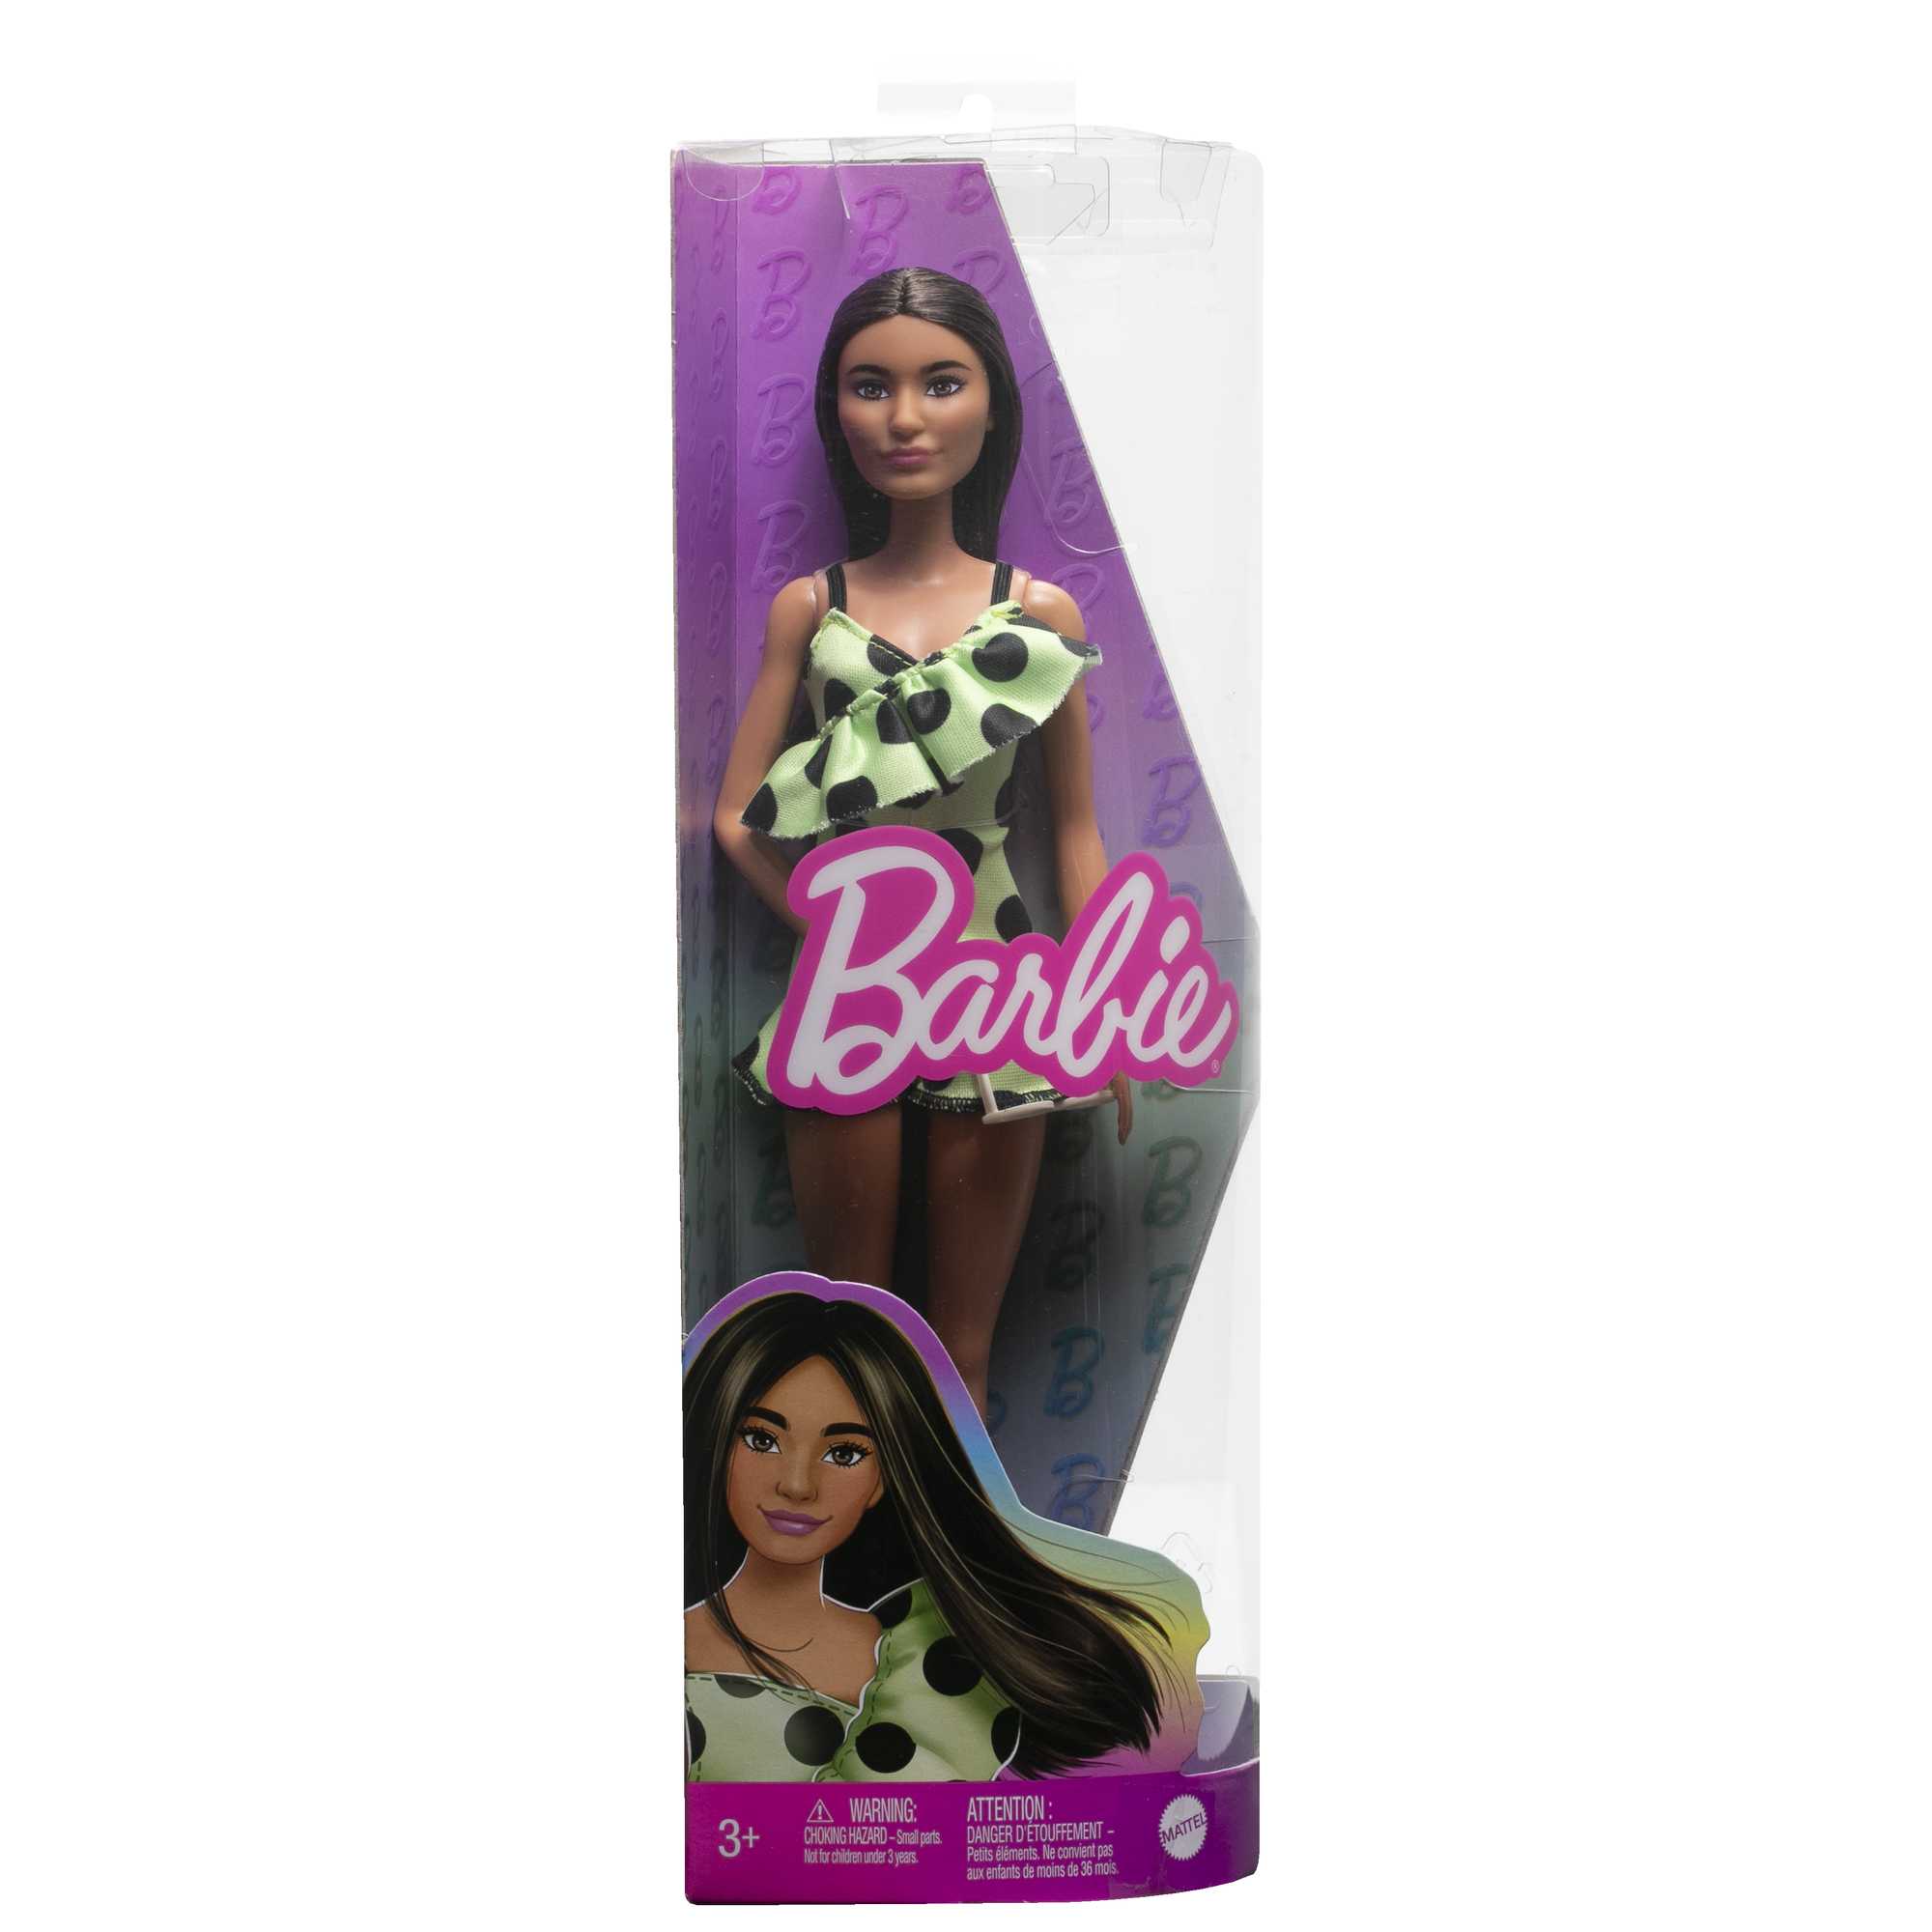 Barbie Ken Fashionistas Doll #123, Broad with Black Curly Hair in  Multi-Colored Shirt & Shorts